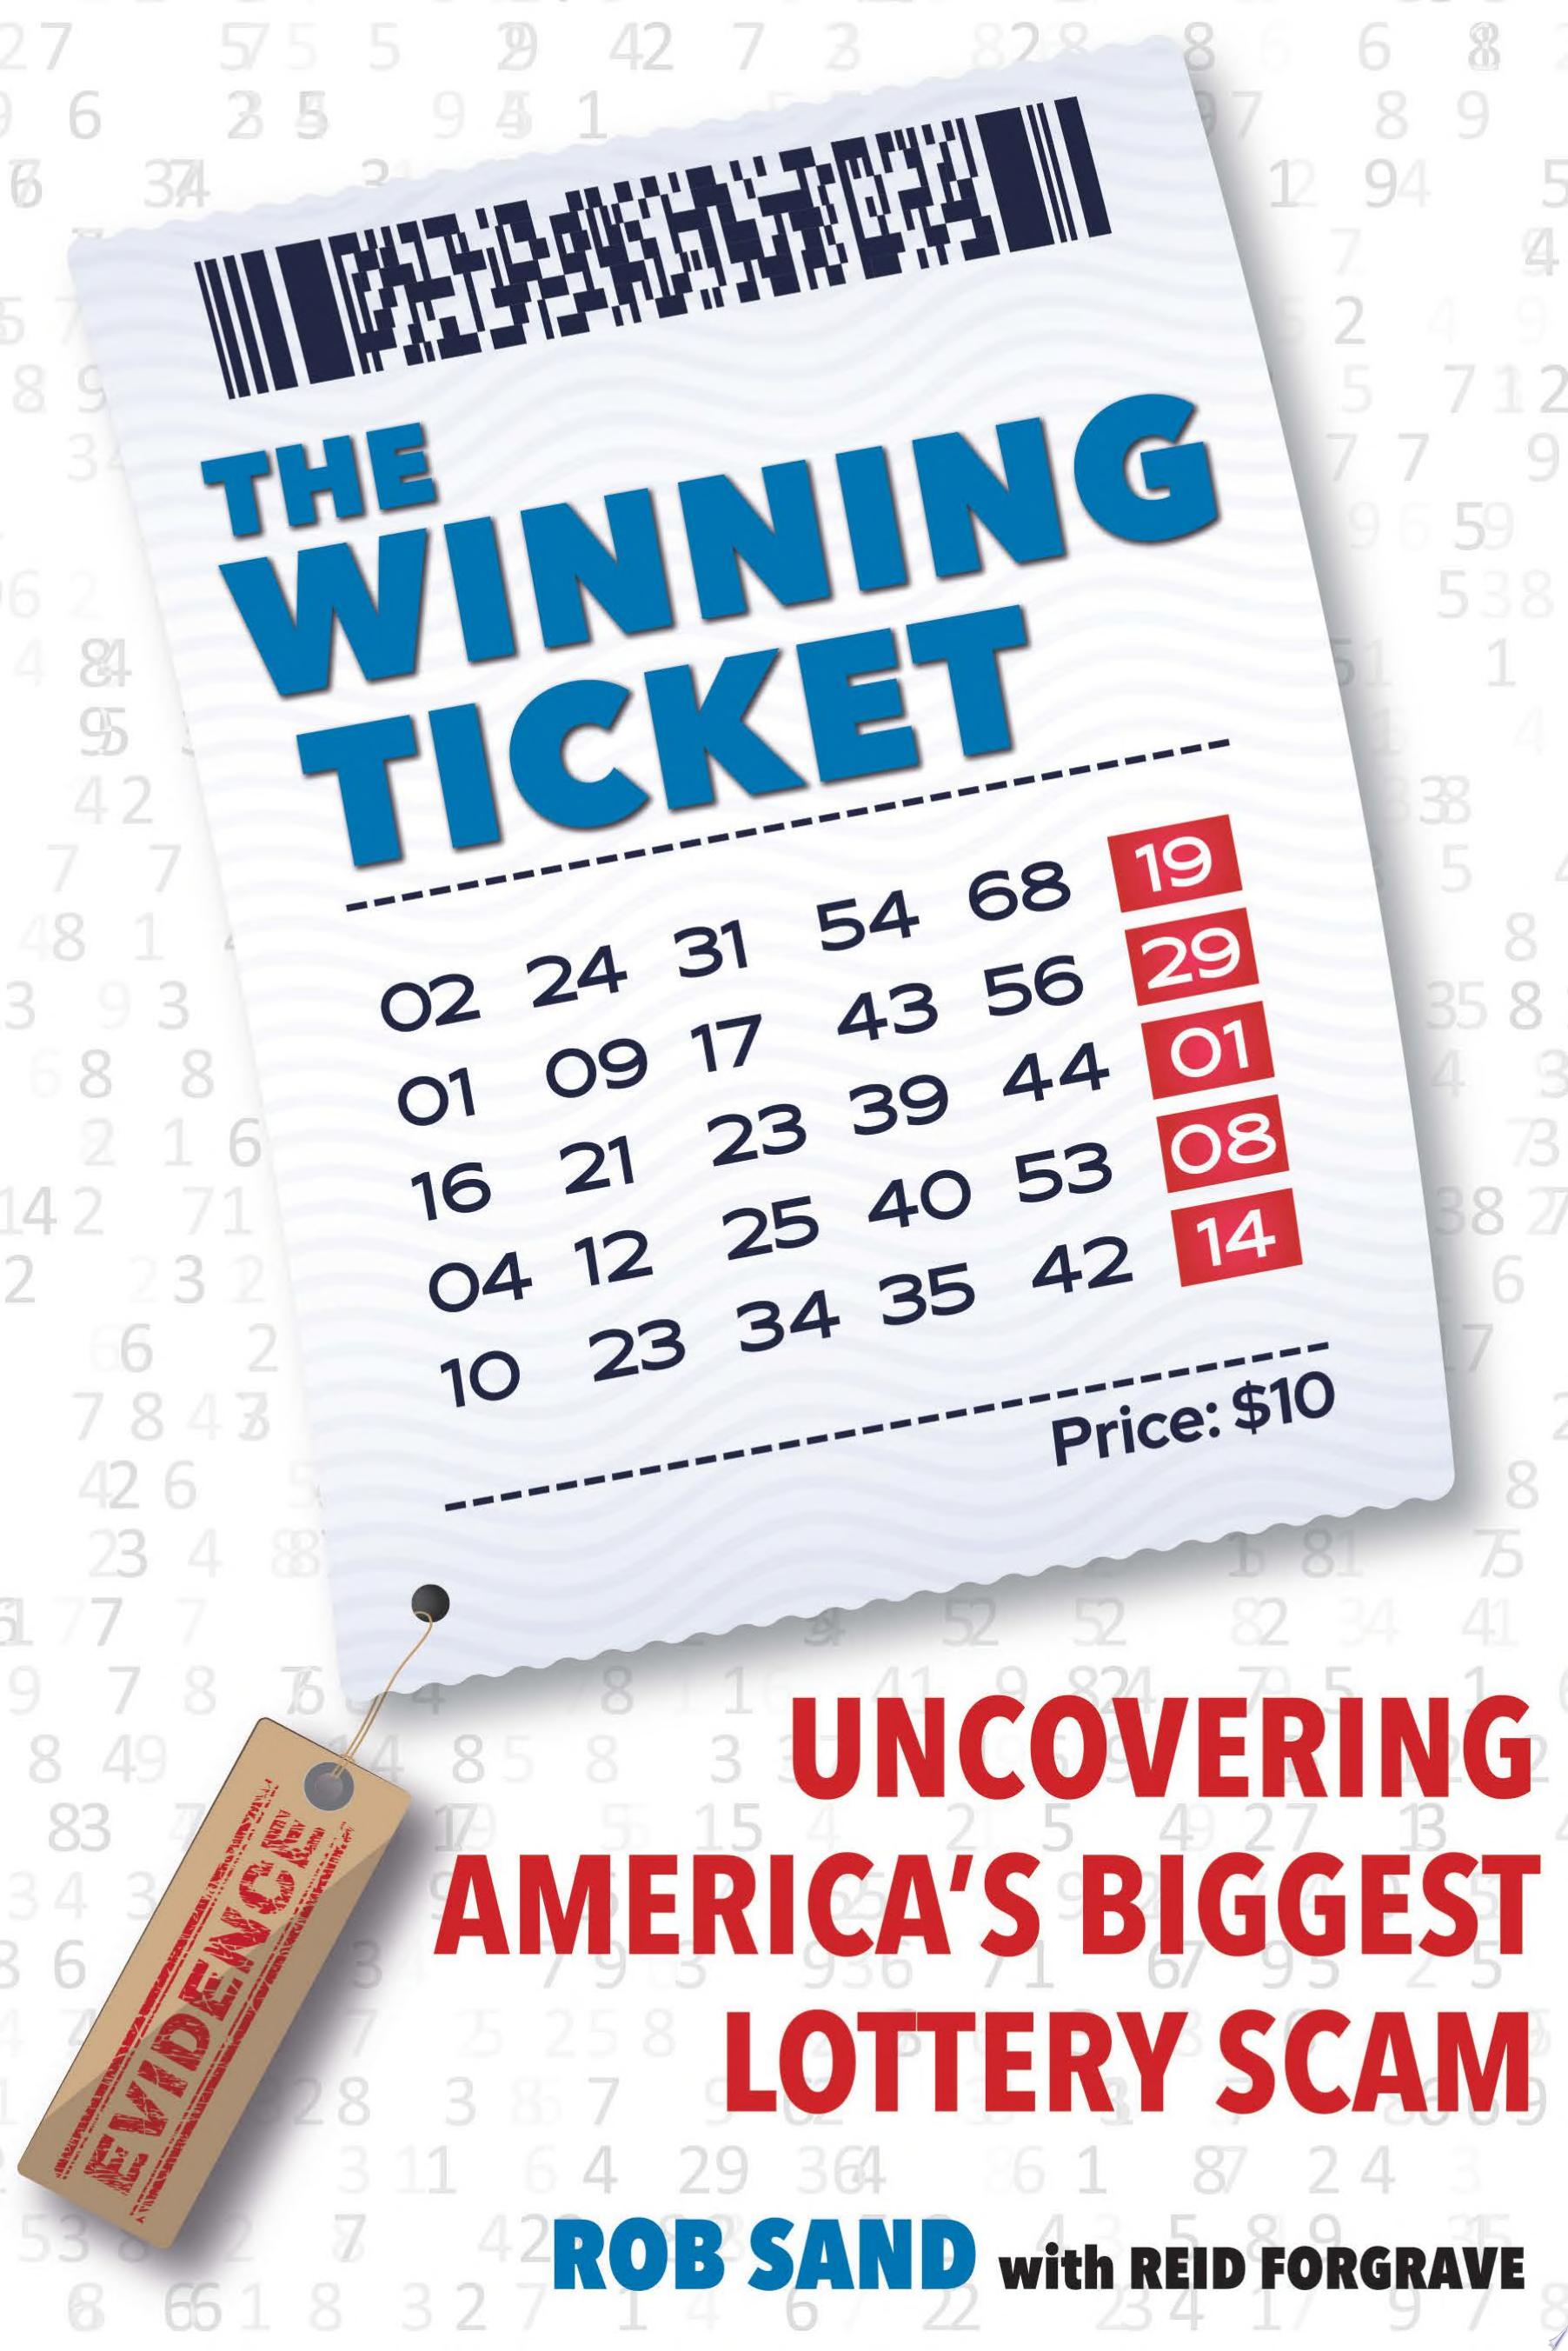 Image for "The Winning Ticket"